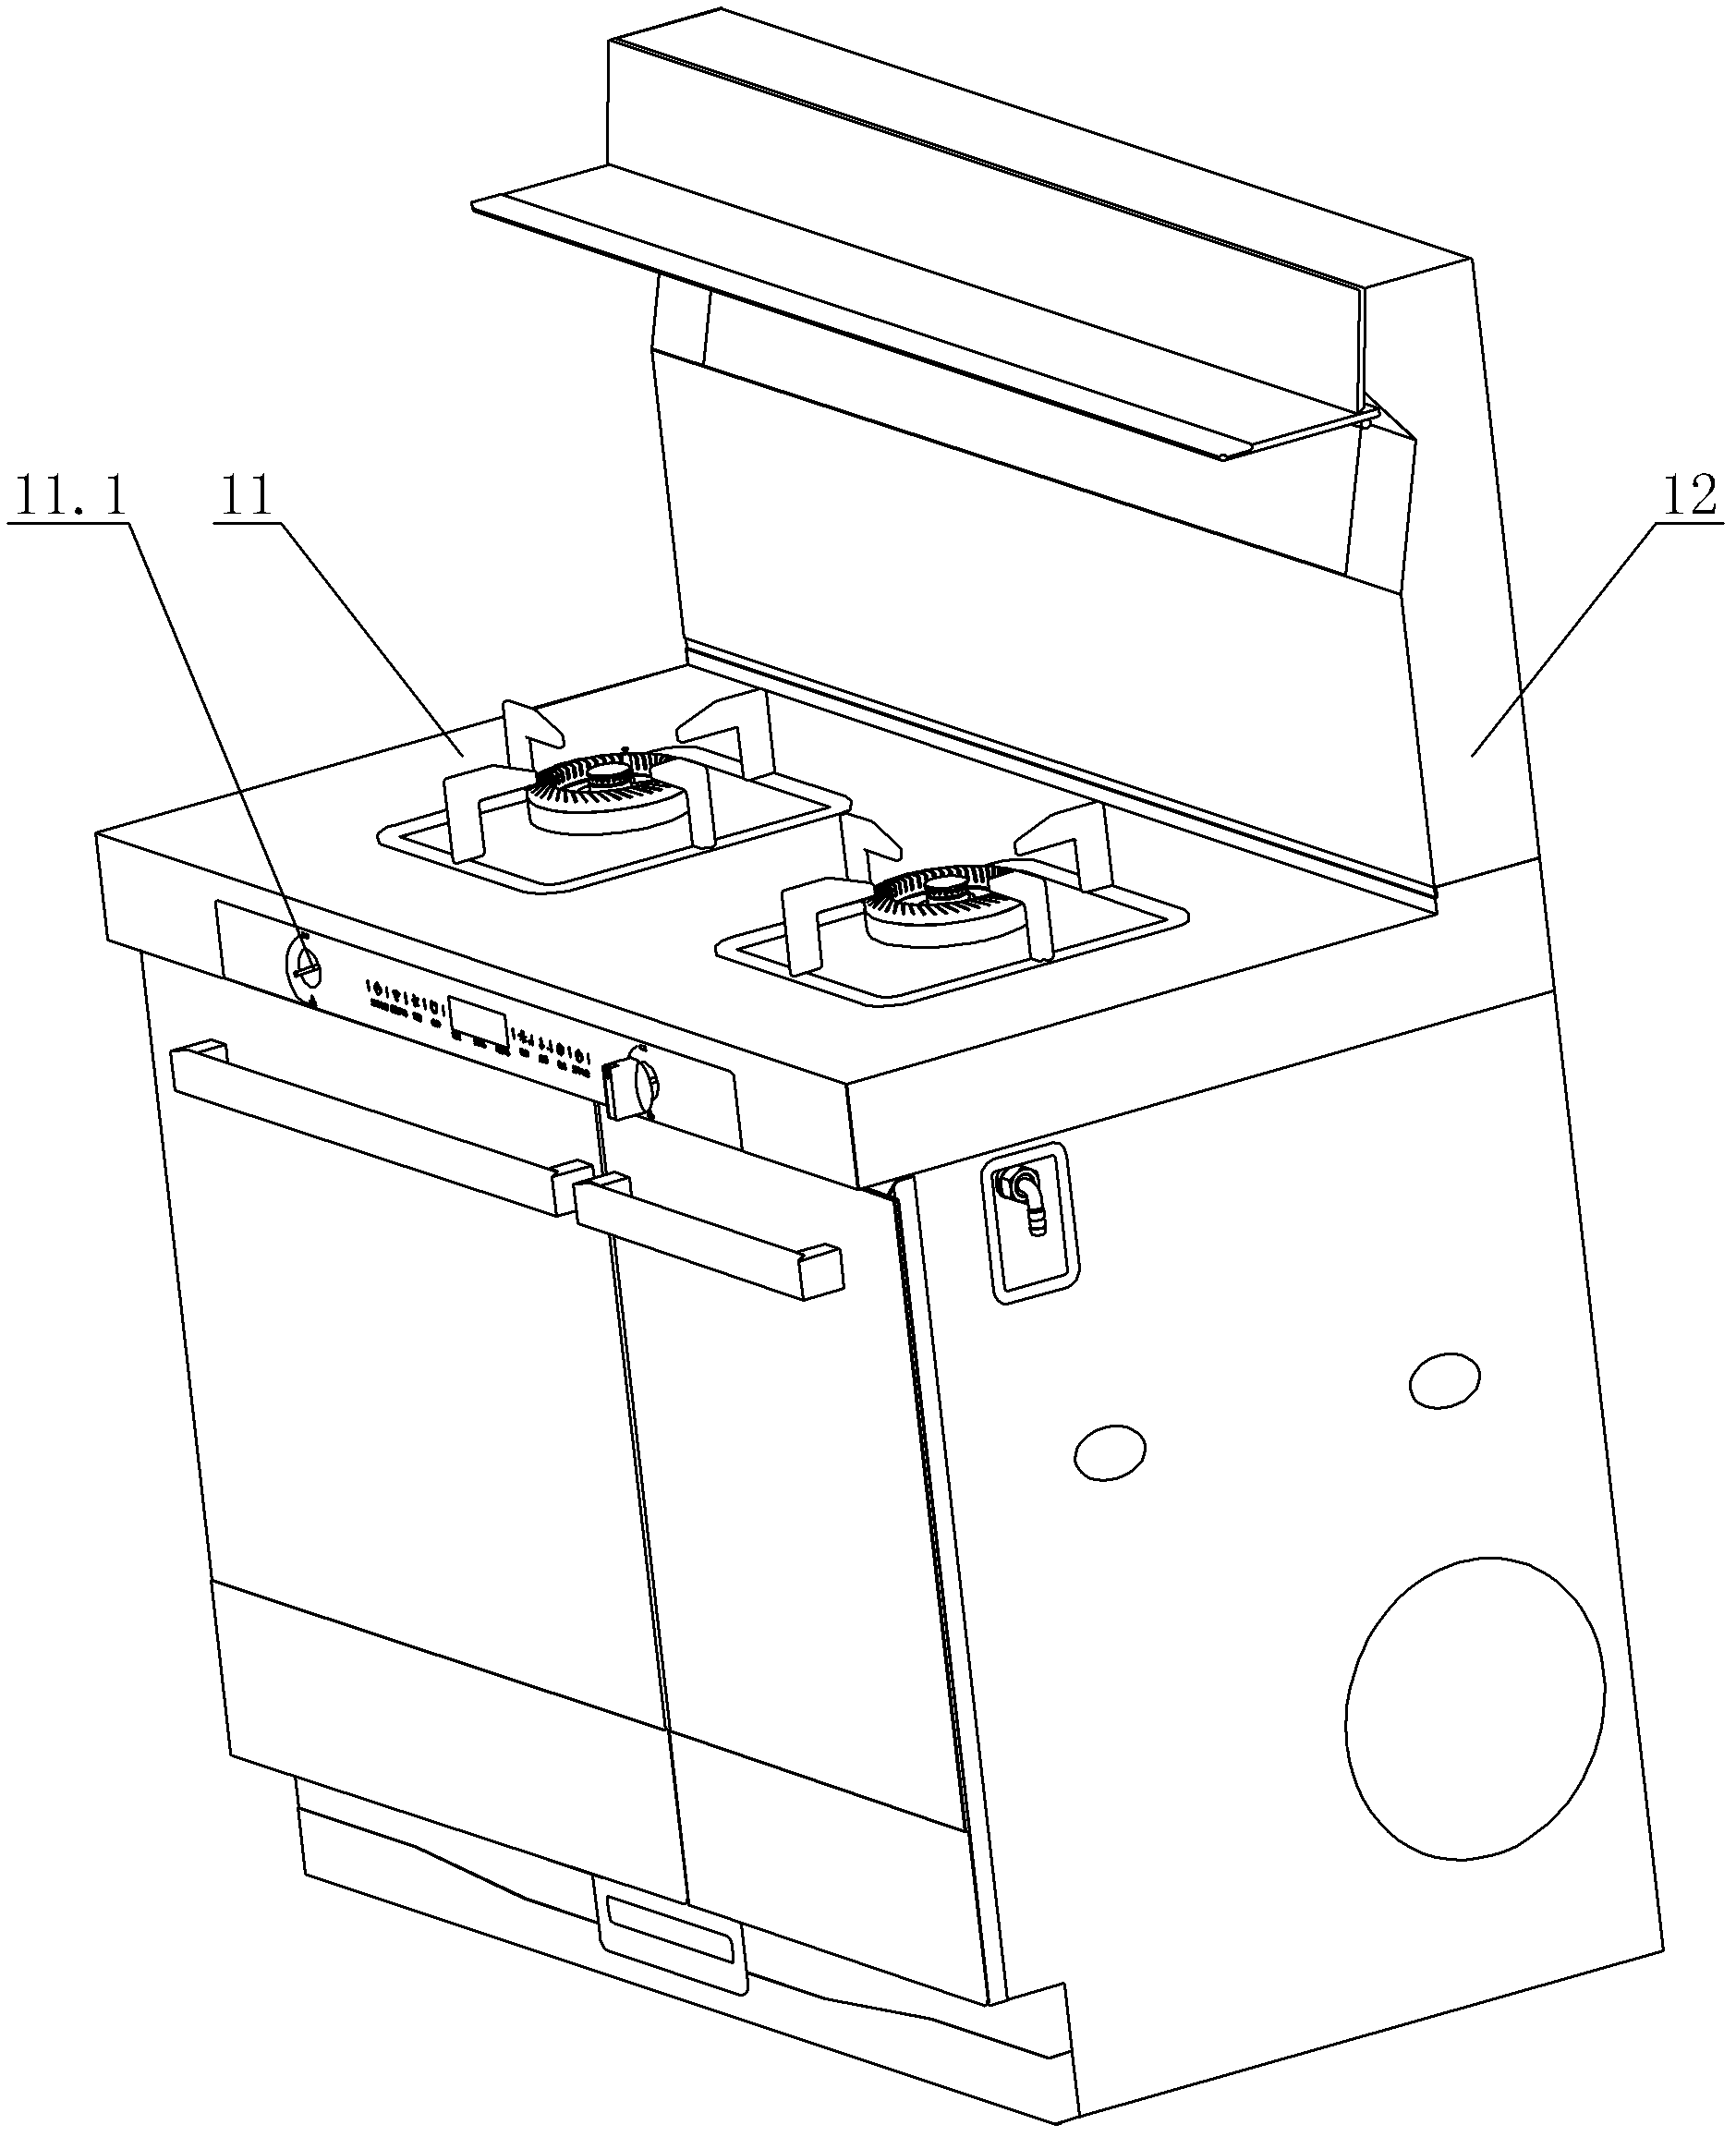 Integrated stove